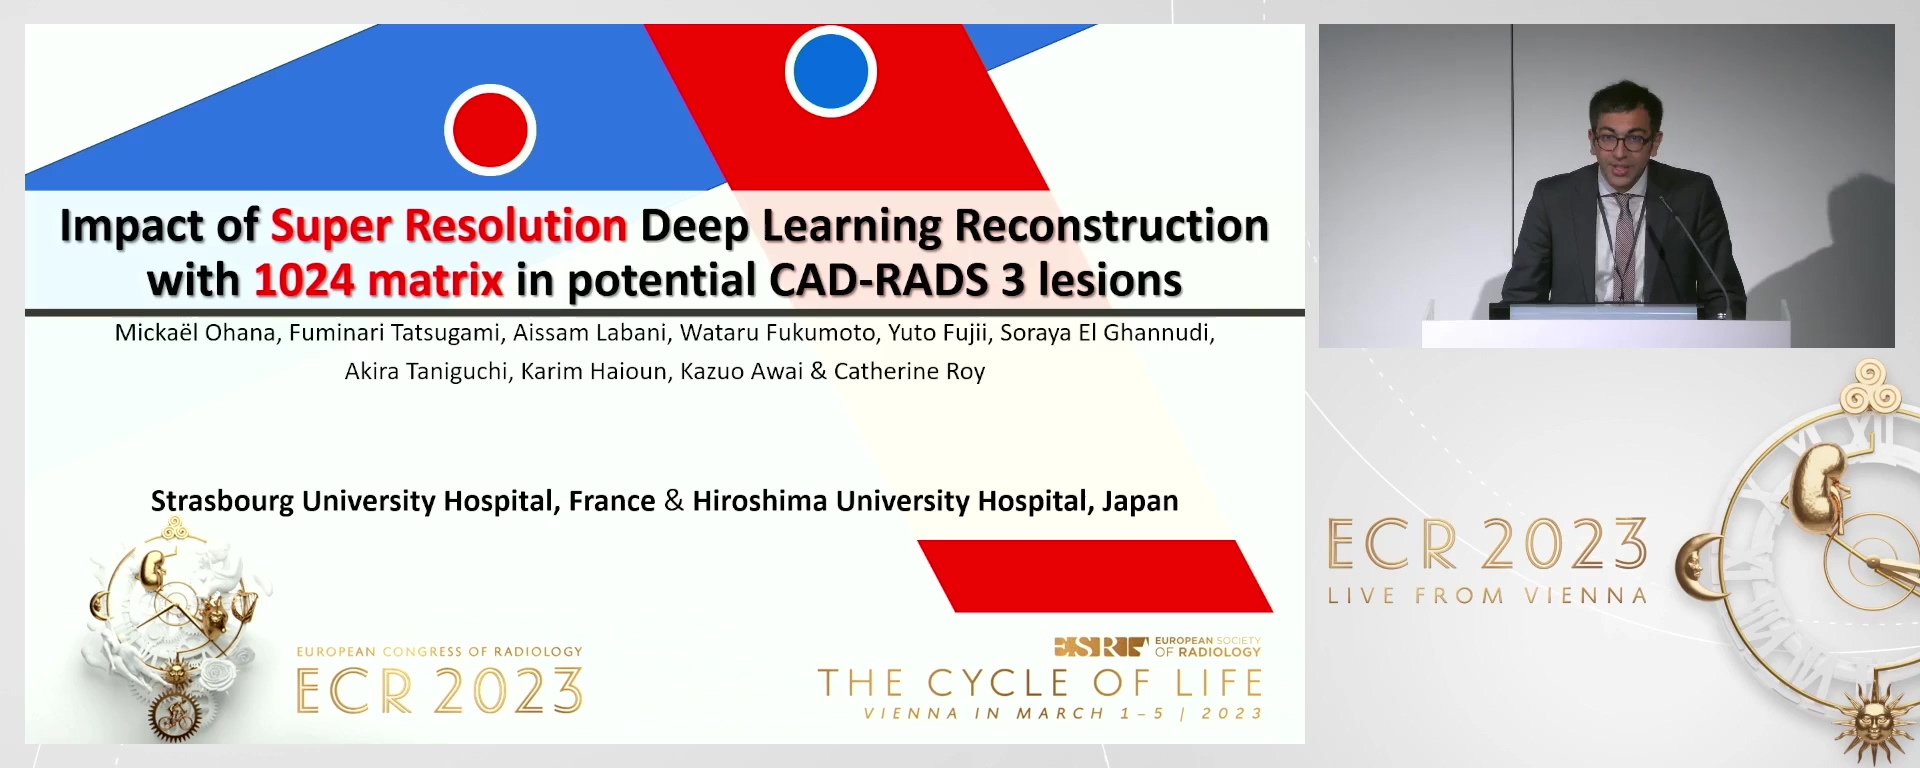 Impact of super resolution deep learning reconstruction with 1024 matrix in potential CAD-RADS 3 lesions: retrospective analysis of 50 cases - Mickaël  Ohana, Schiltigheim / FR